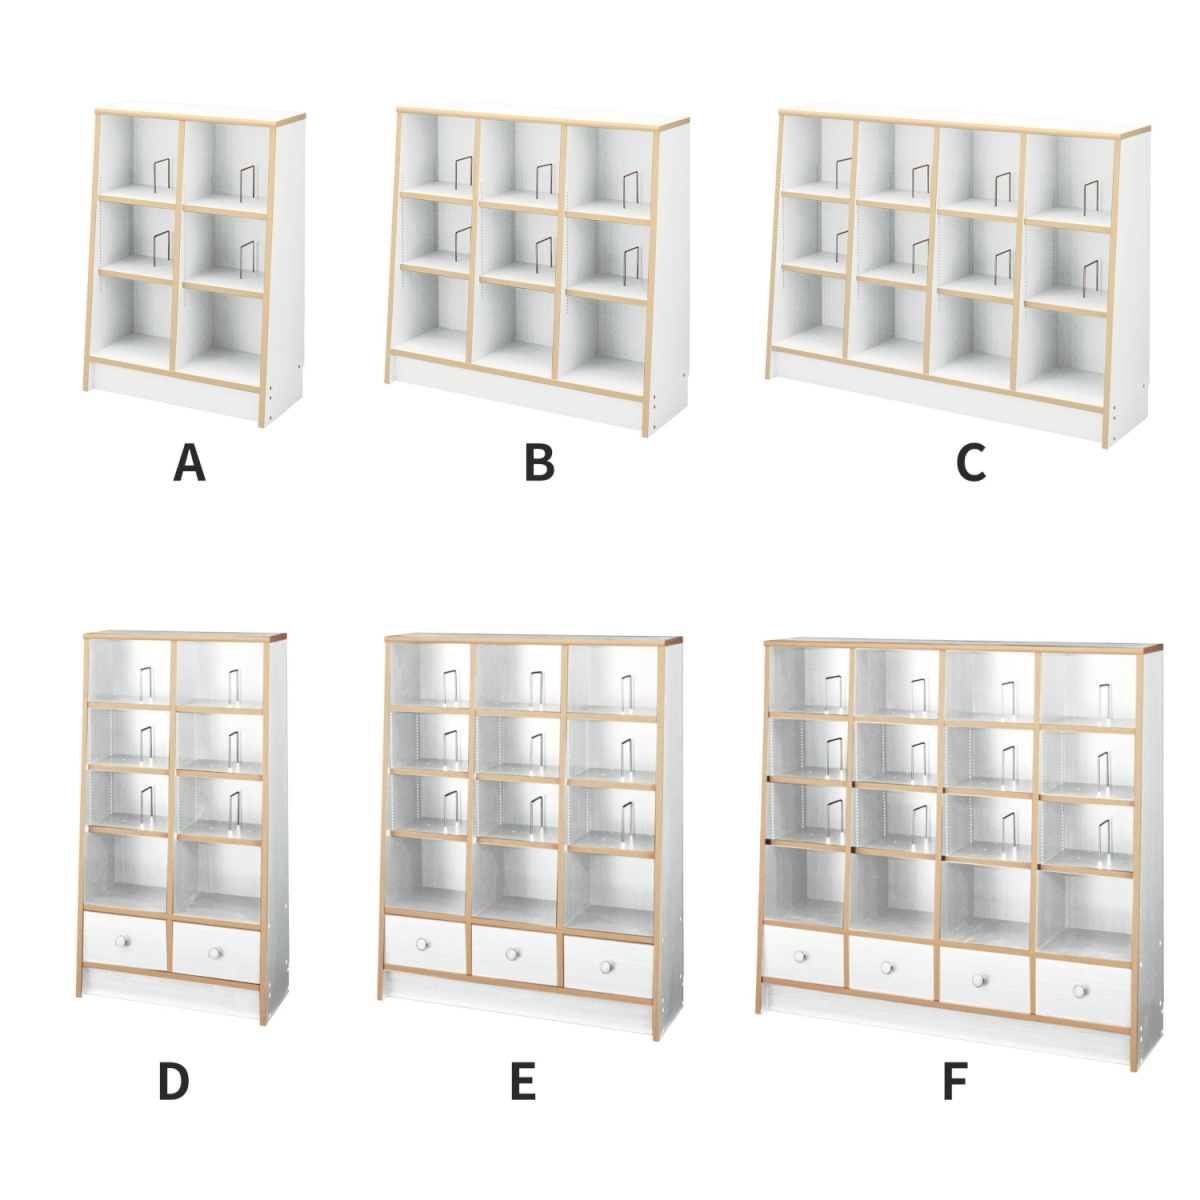  picture book shelves bookcase picture book storage picture book book@ storage shelves rack shelf storage furniture furniture 1cm pitch moveable shelves child part shop Kids room . one-side attaching adjustment simple E stylish new life 